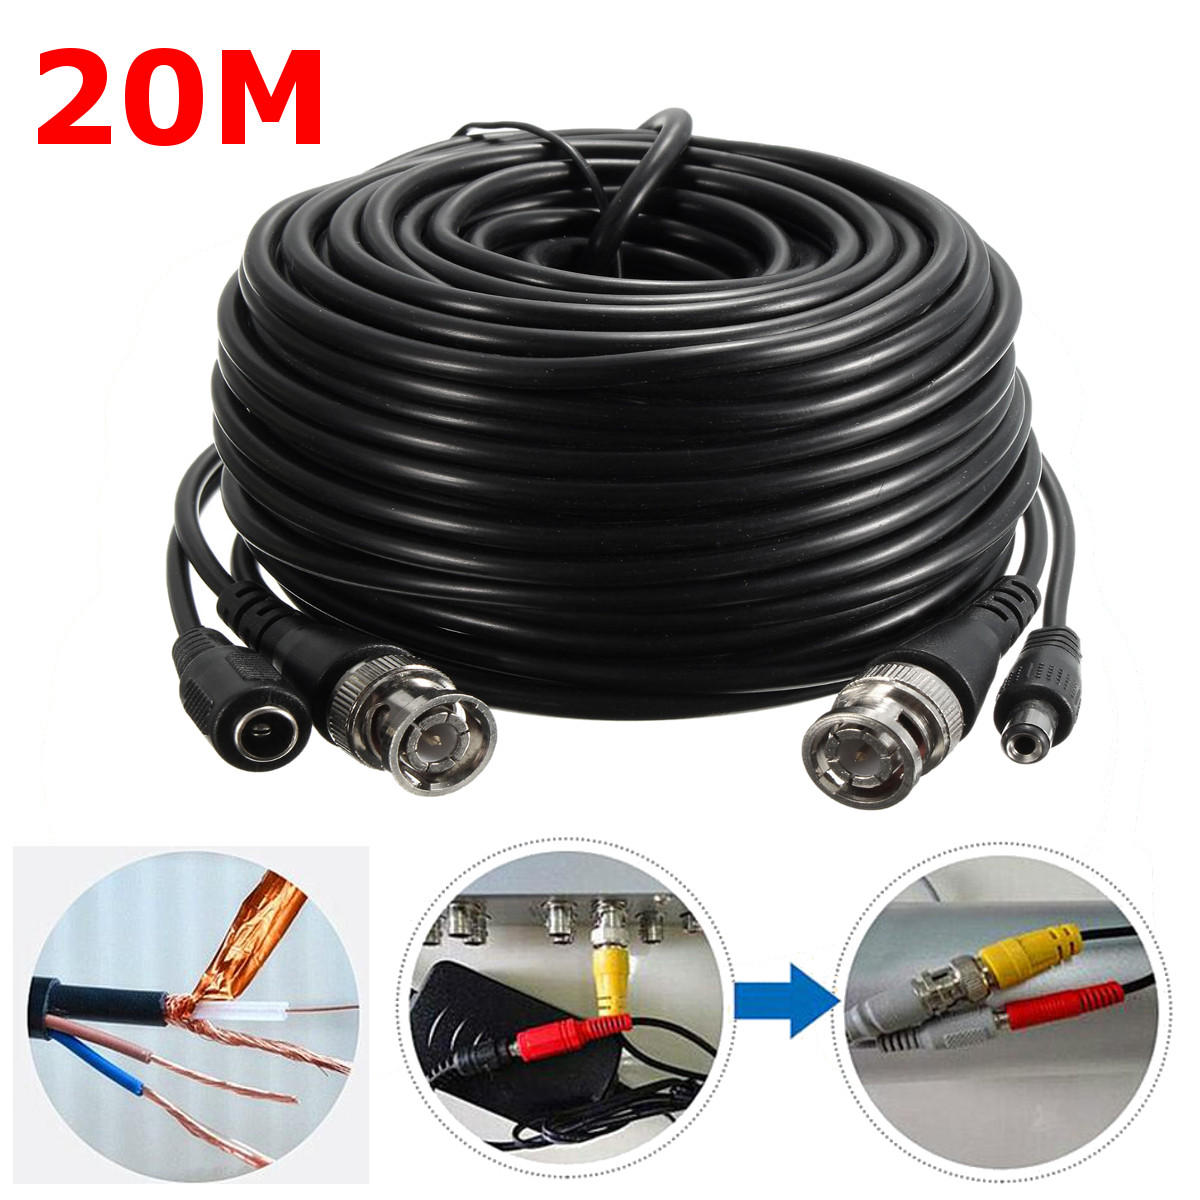 65Ft 20M Security Camera Cable Video Power Extension Wire CCTV DVR BNC...